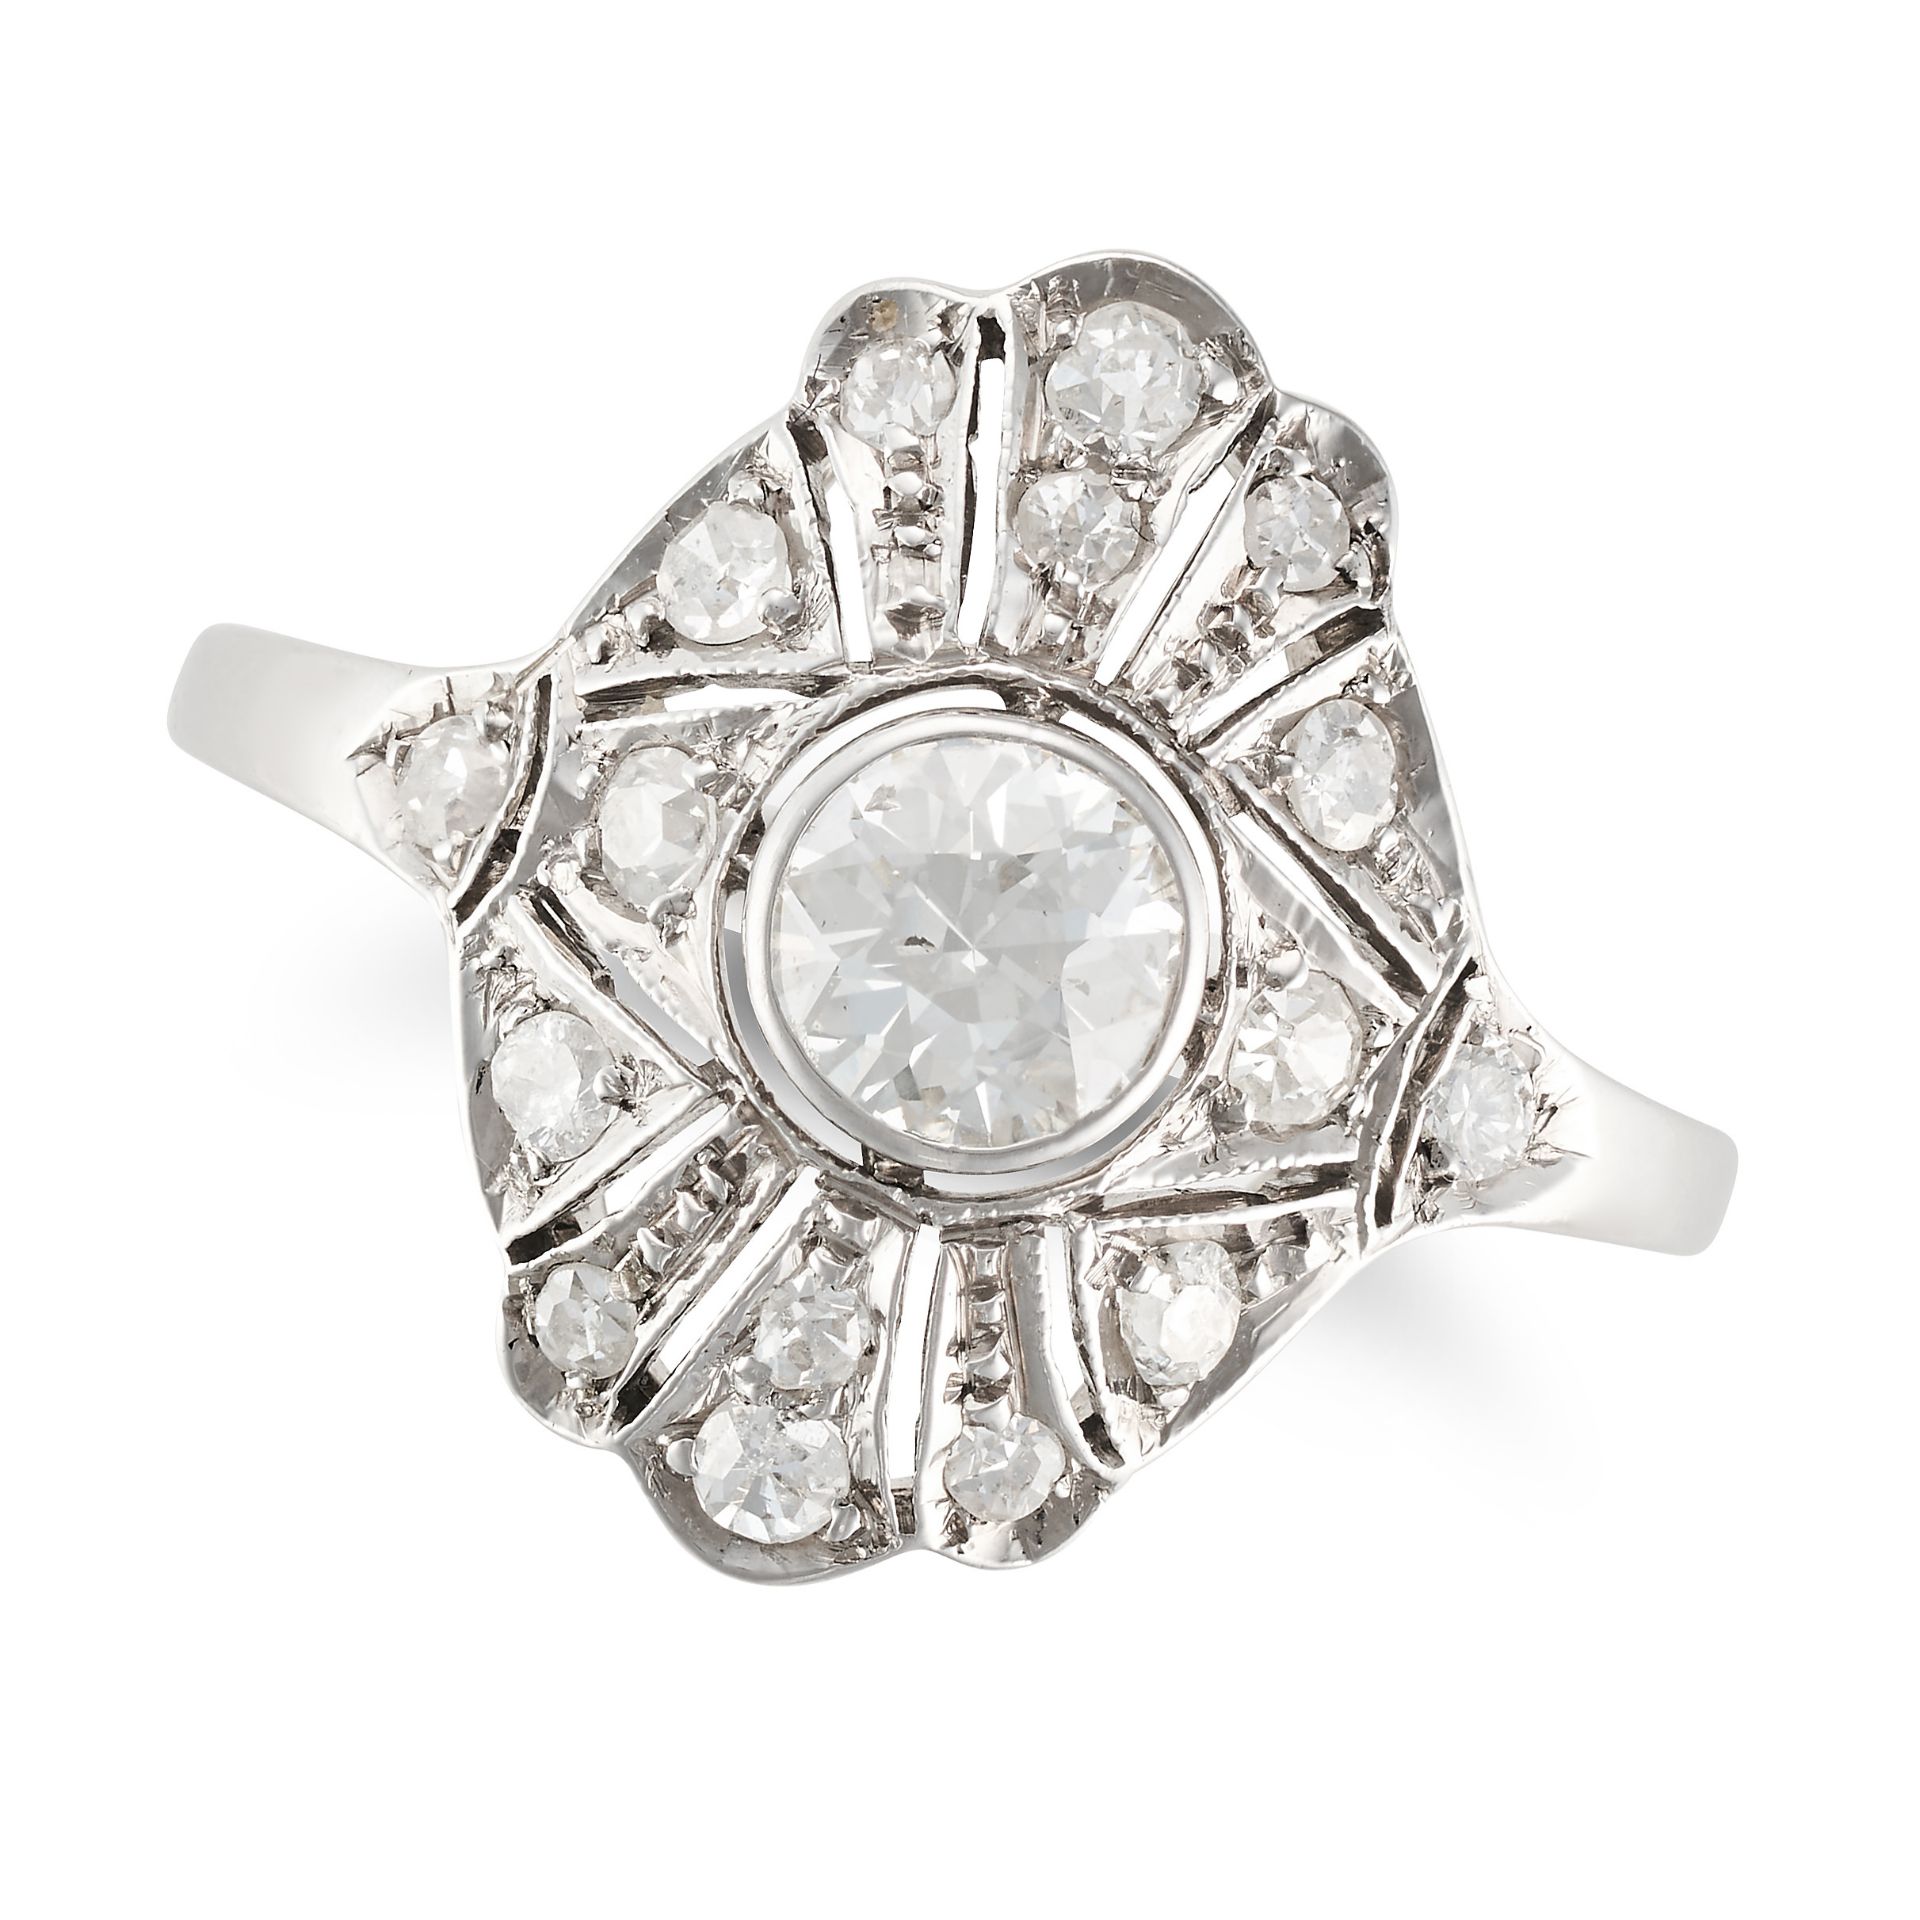 AN AUSTRIAN DIAMOND DRESS RING in 14ct white gold, set to the centre with a transitional cut diam...